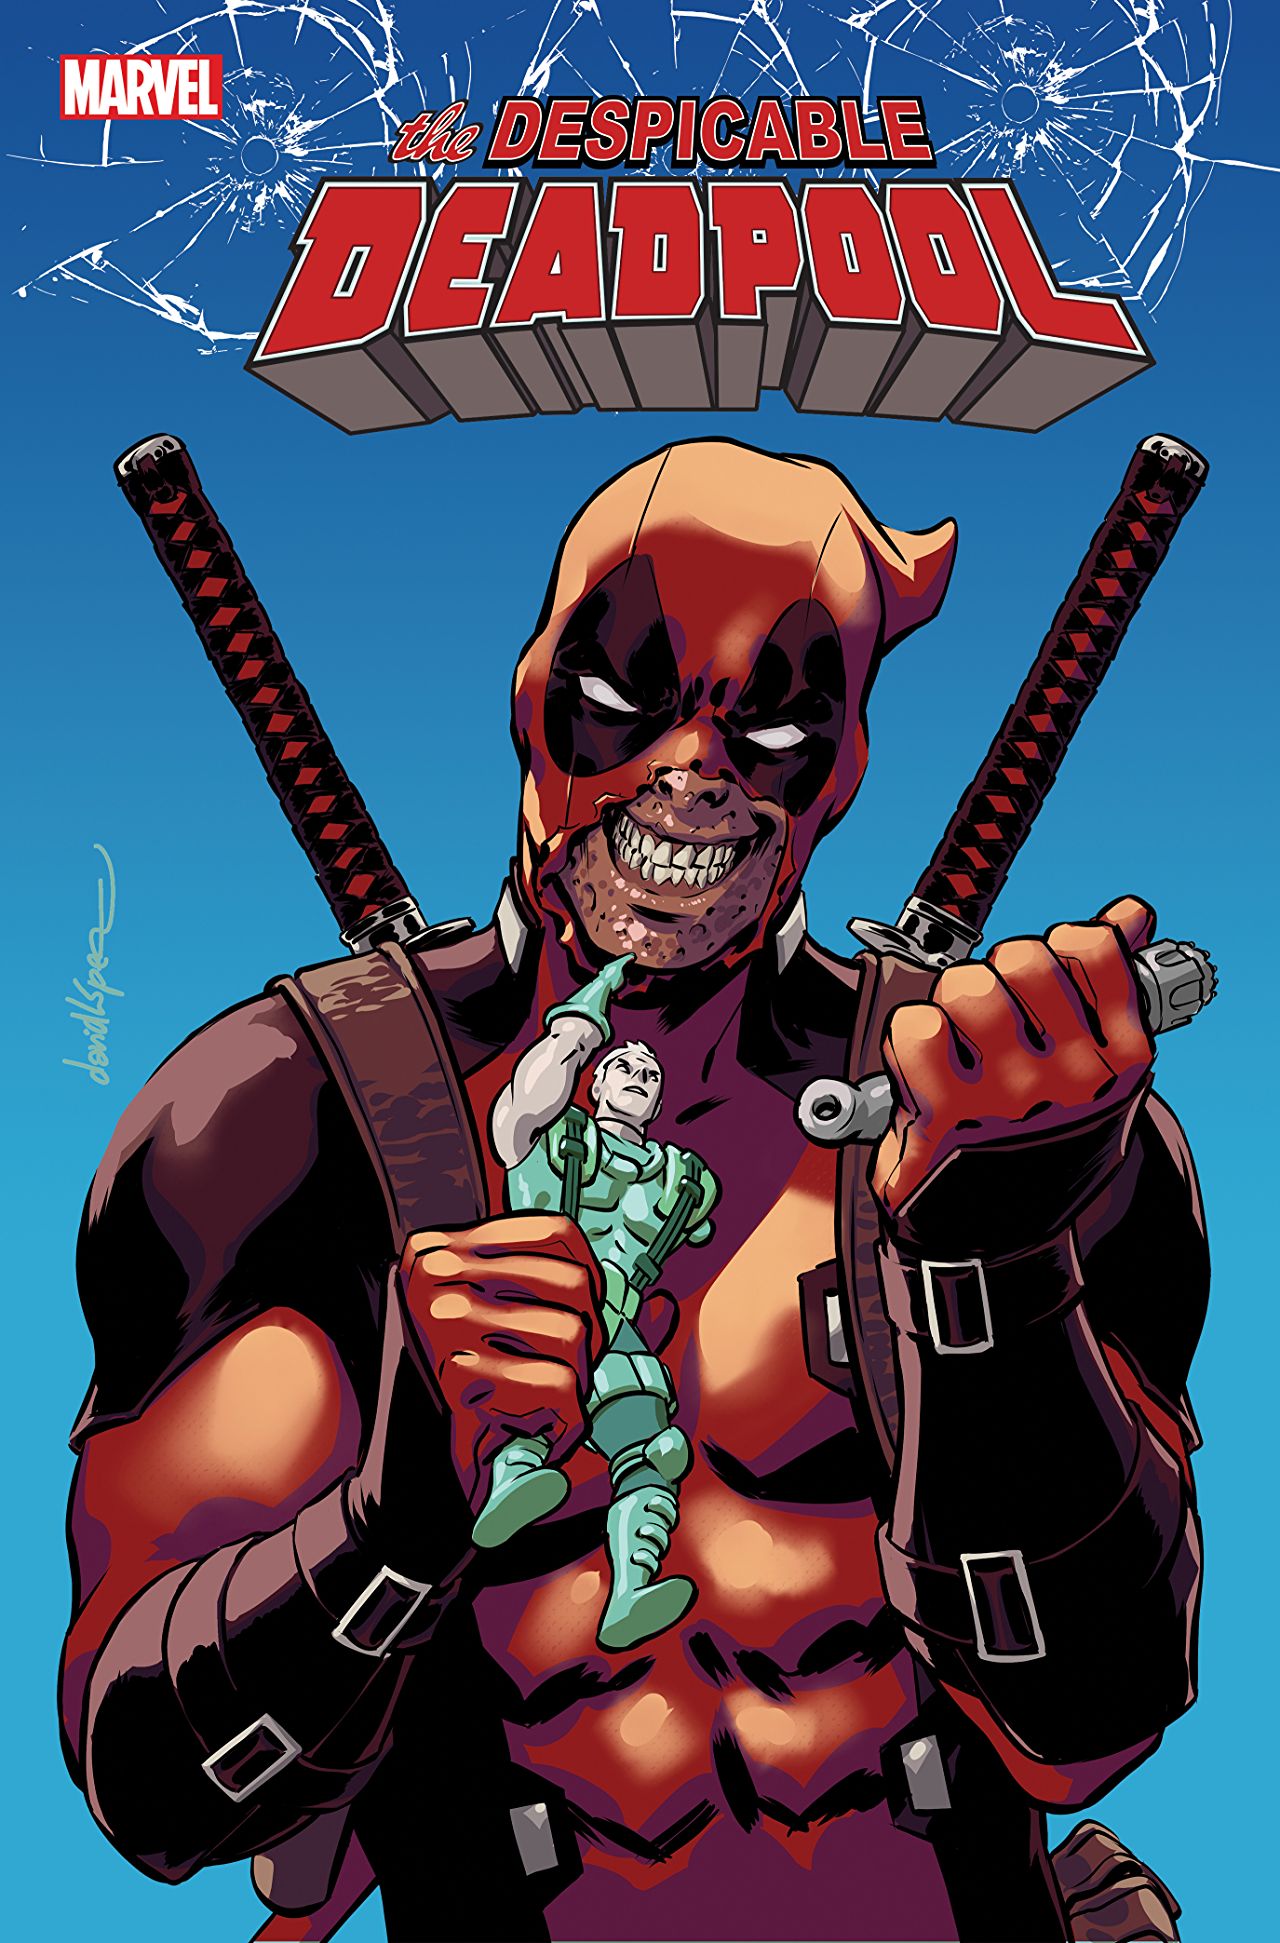 'The Despicable Deadpool Vol 1: Deadpool Kills Cable' review: Come for the laughs, stay for the laughs